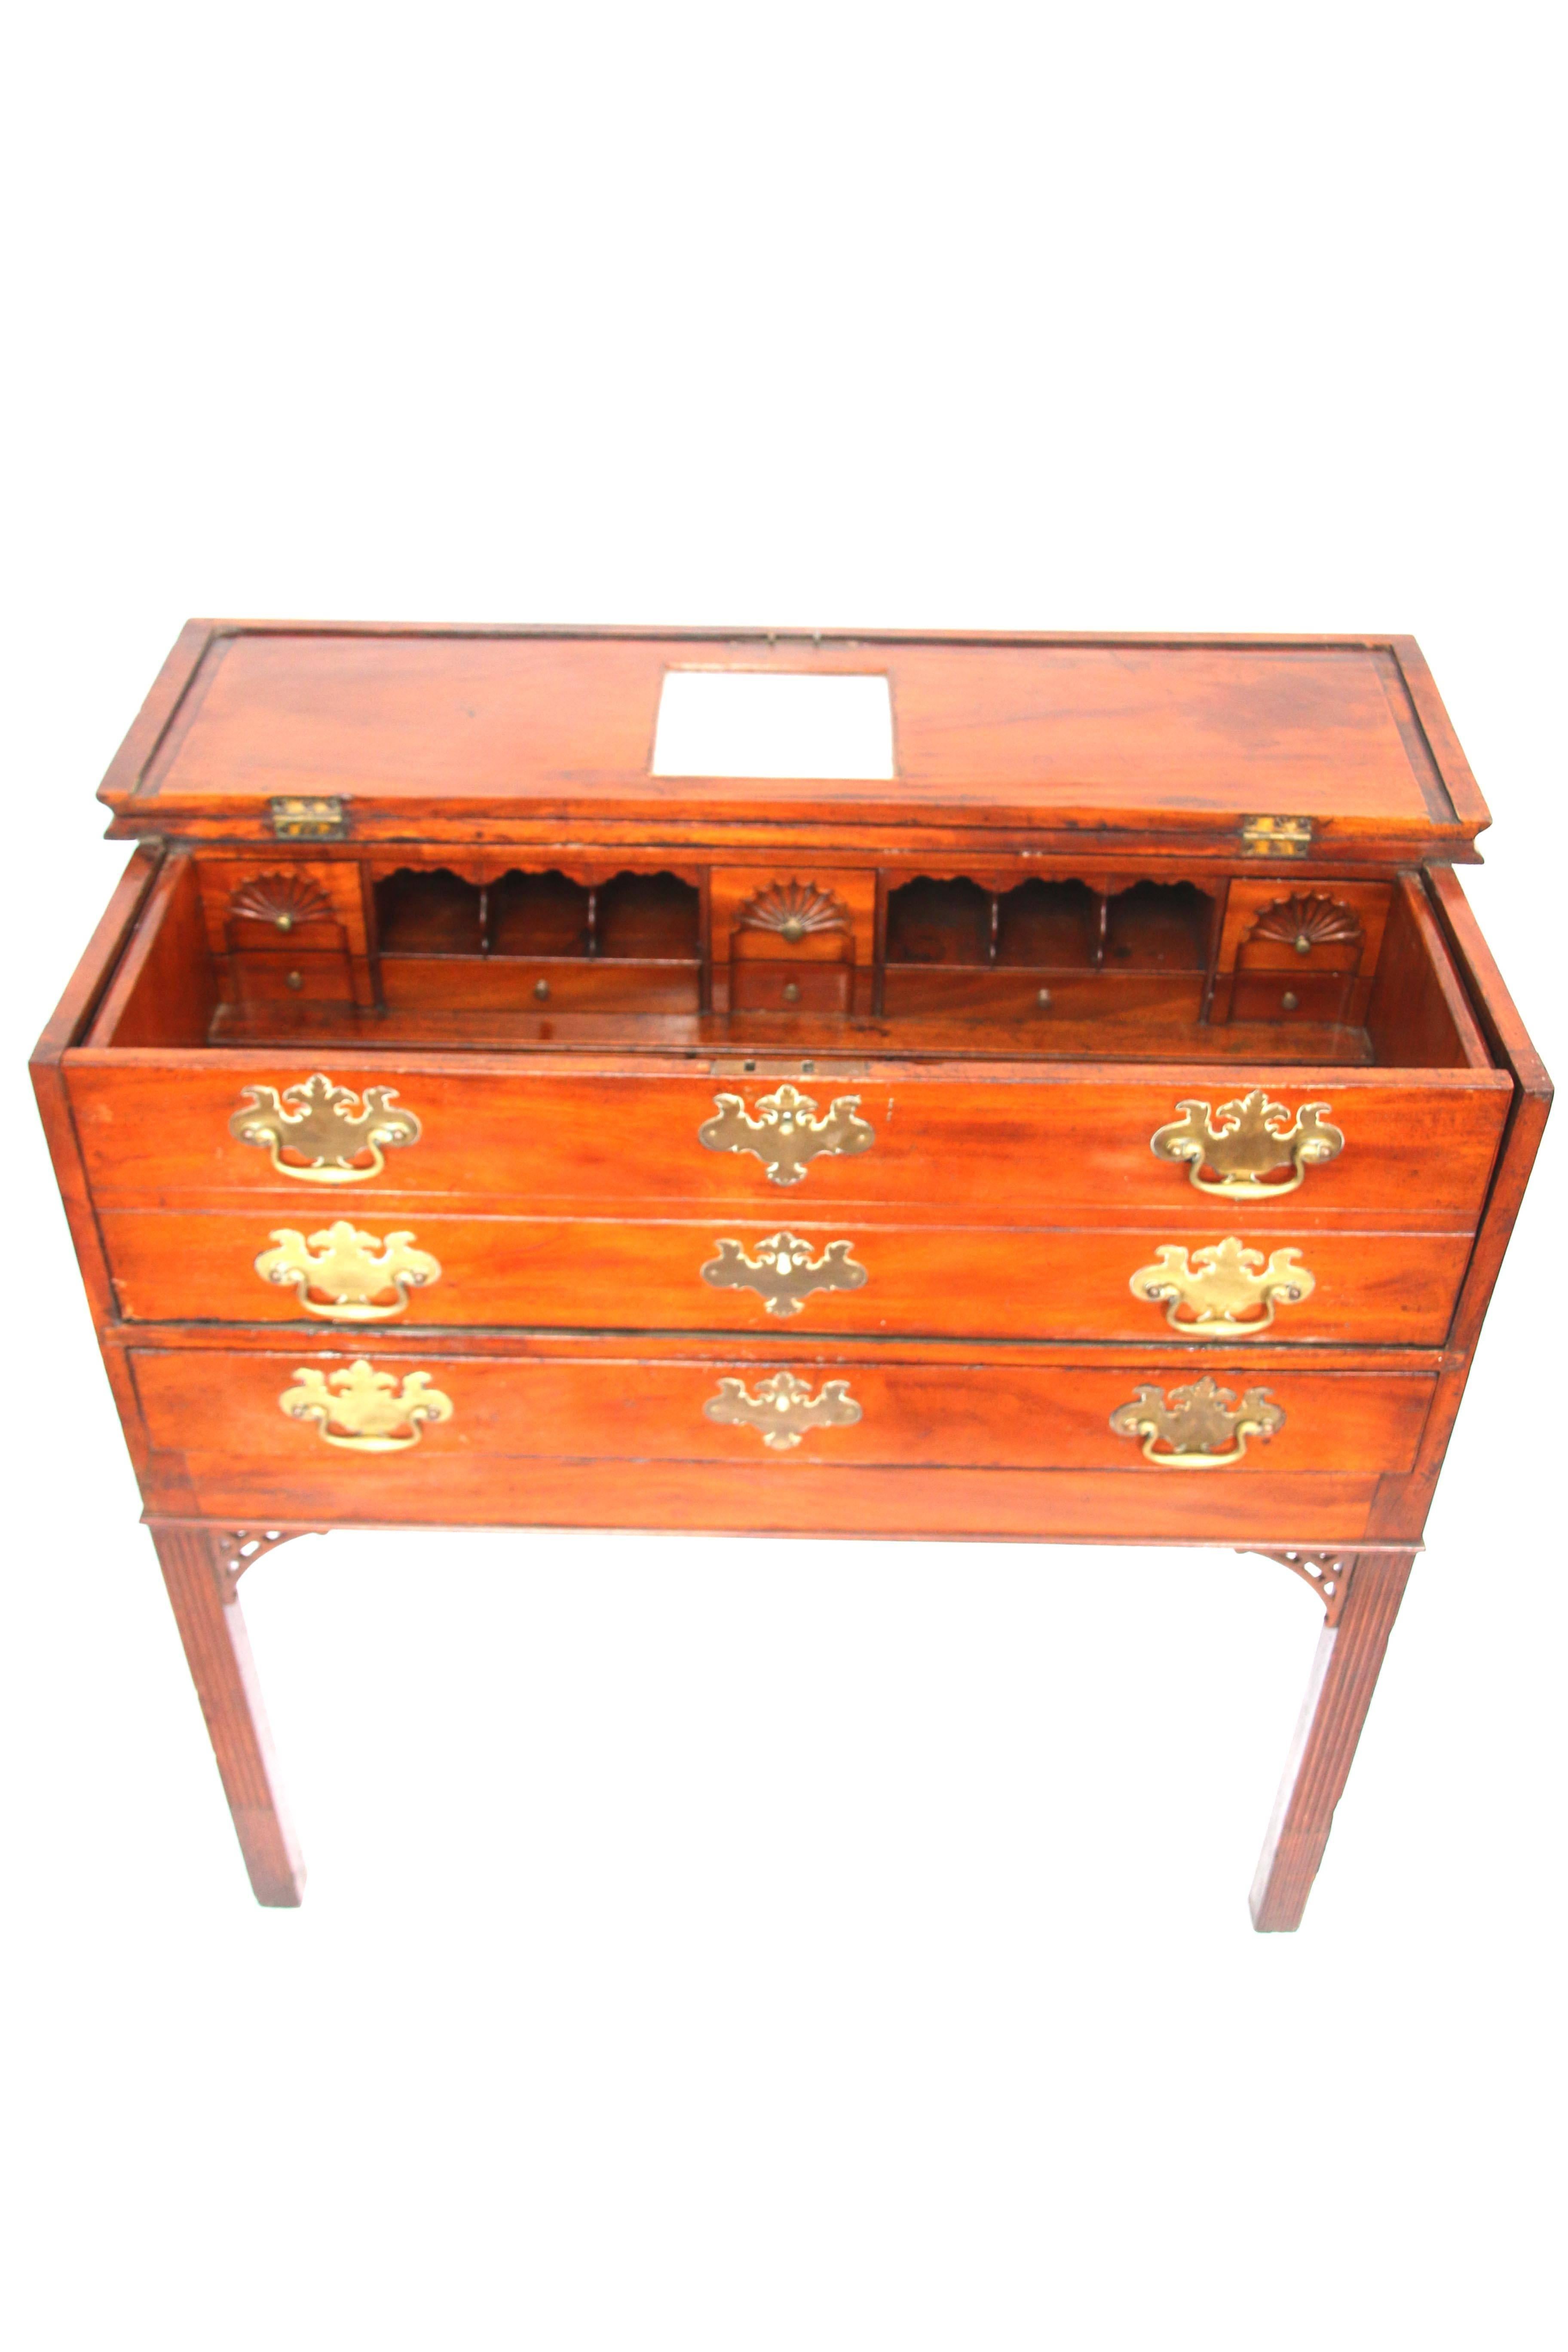 Rare Form Rhode Island Chippendale Mahogany Desk In Excellent Condition For Sale In Woodbury, CT